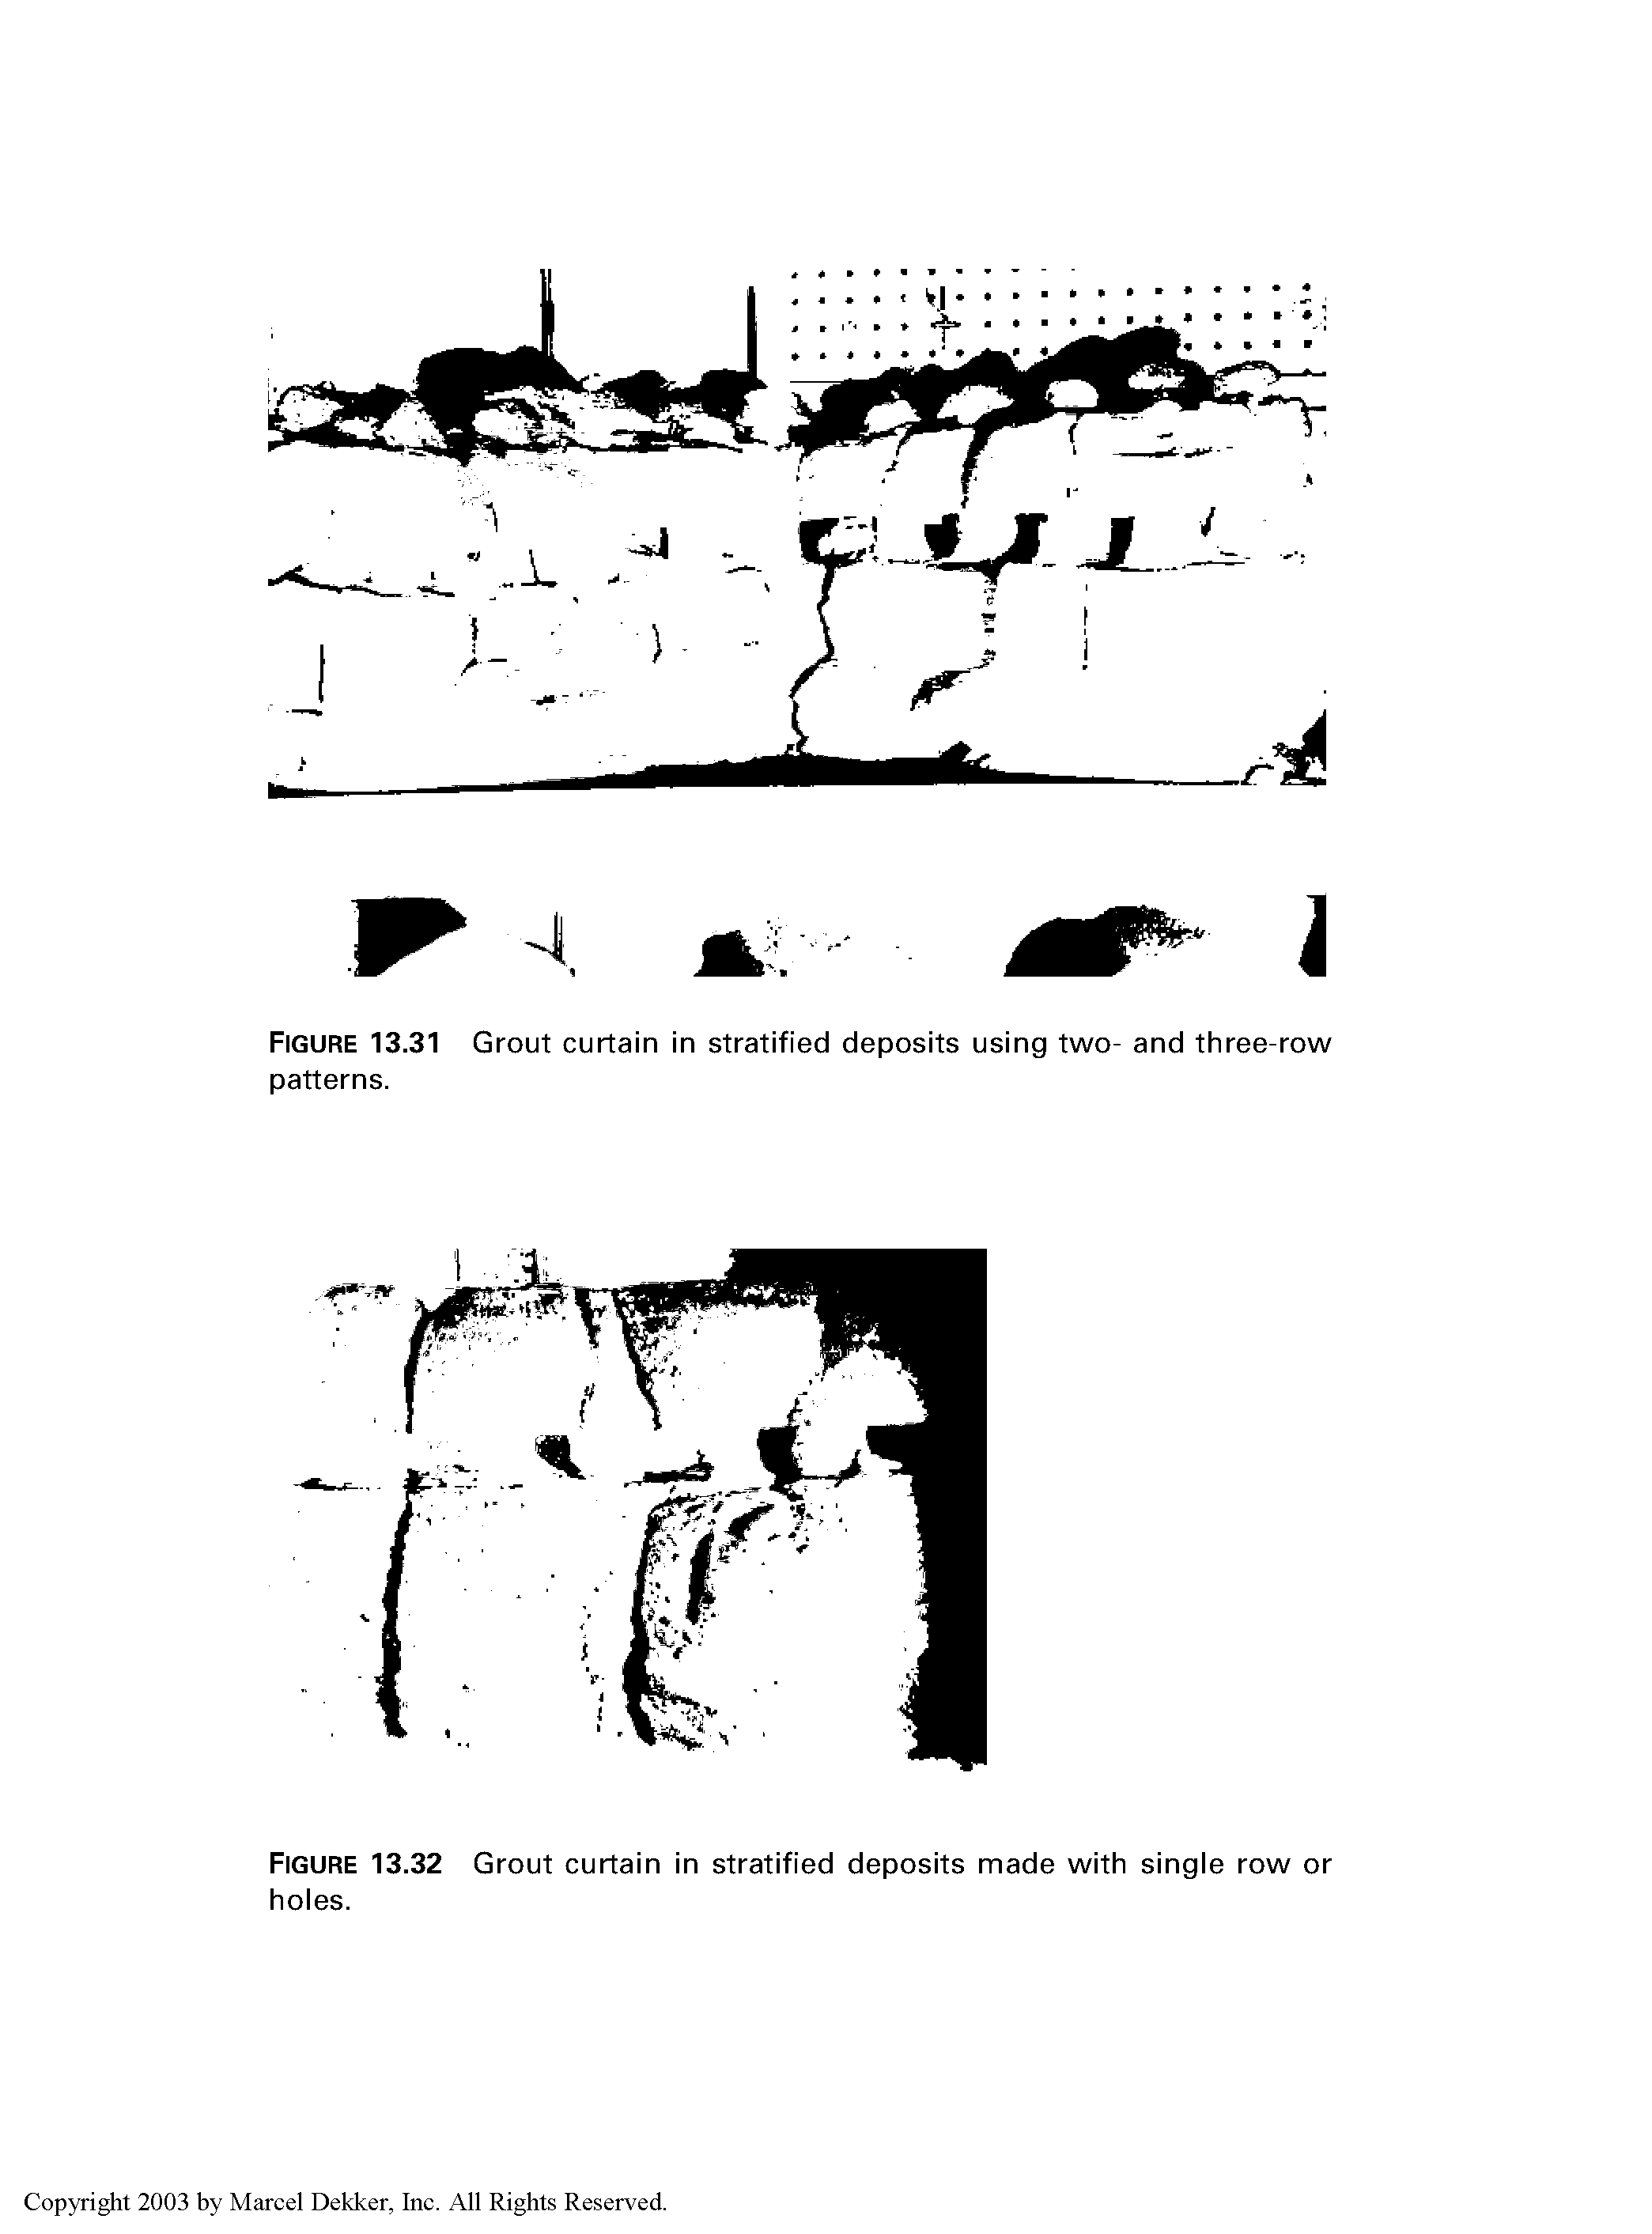 Figure 13.31 Grout curtain in stratified deposits using two- and three-row patterns.